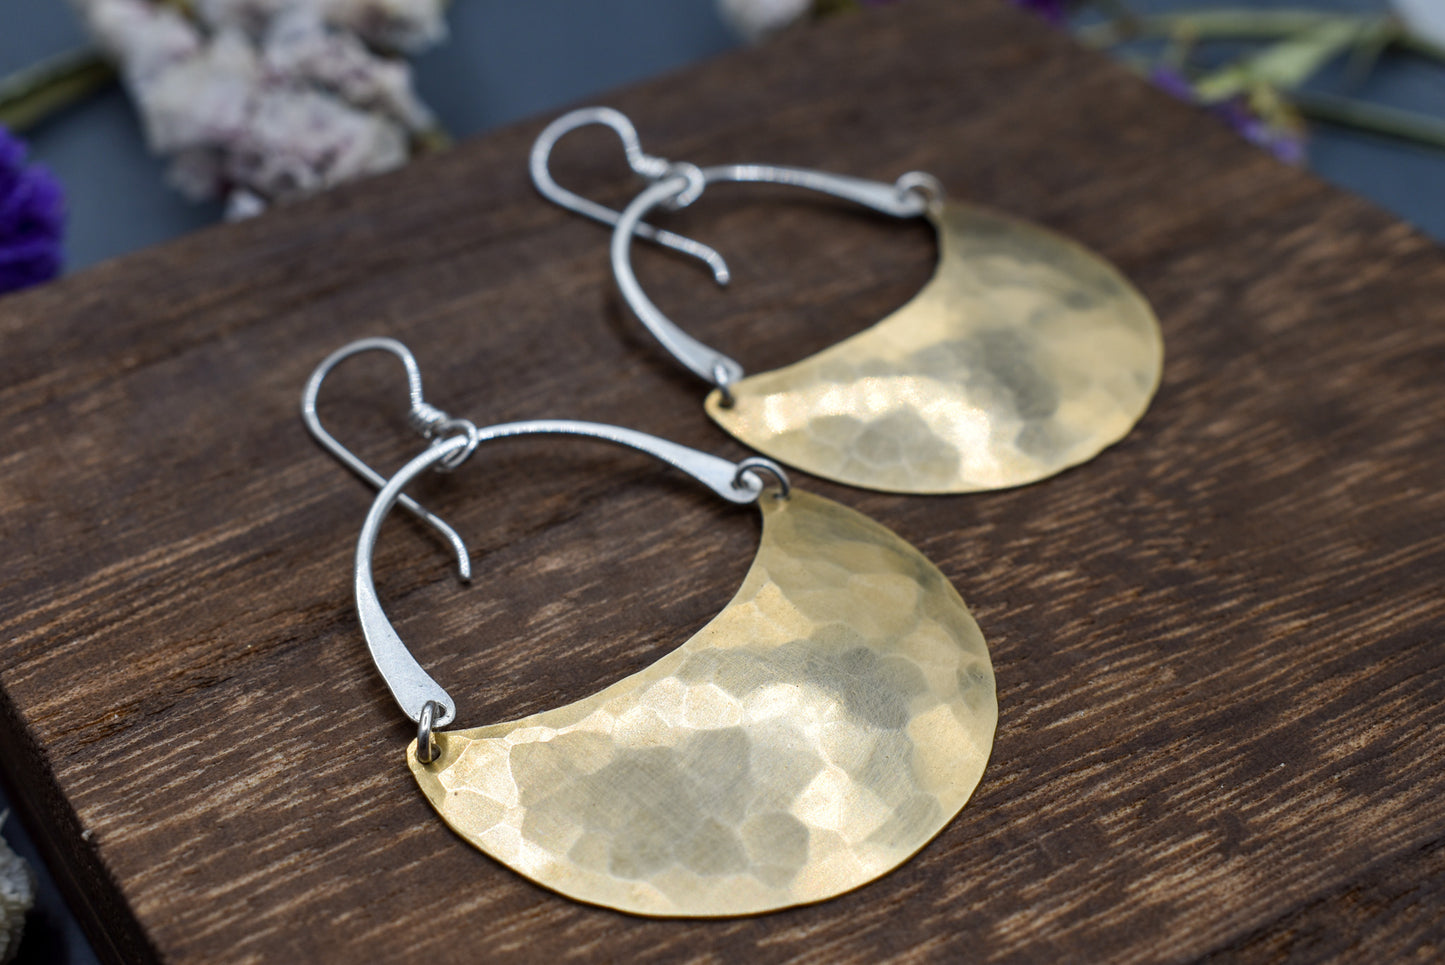 Hammered Crescent Moon Earrings - Brass